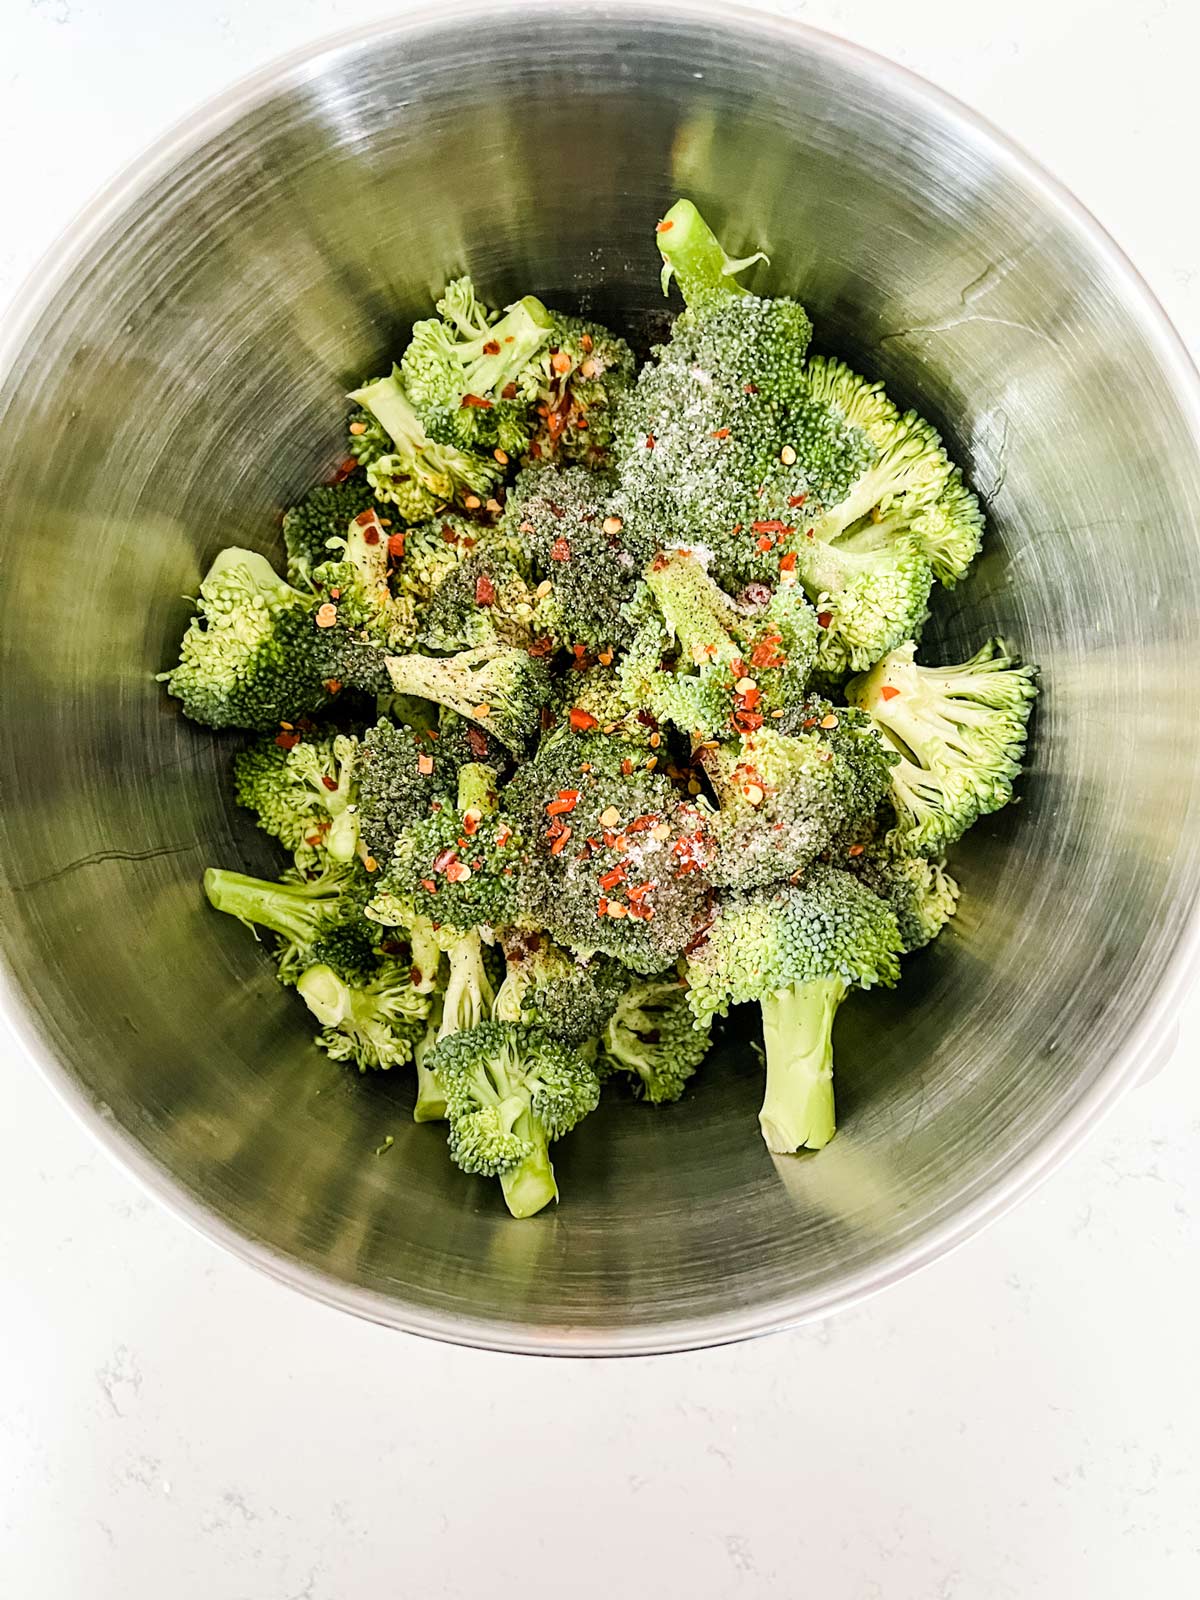 Broccoli florets in a metal bowl with seasonings on top of them.